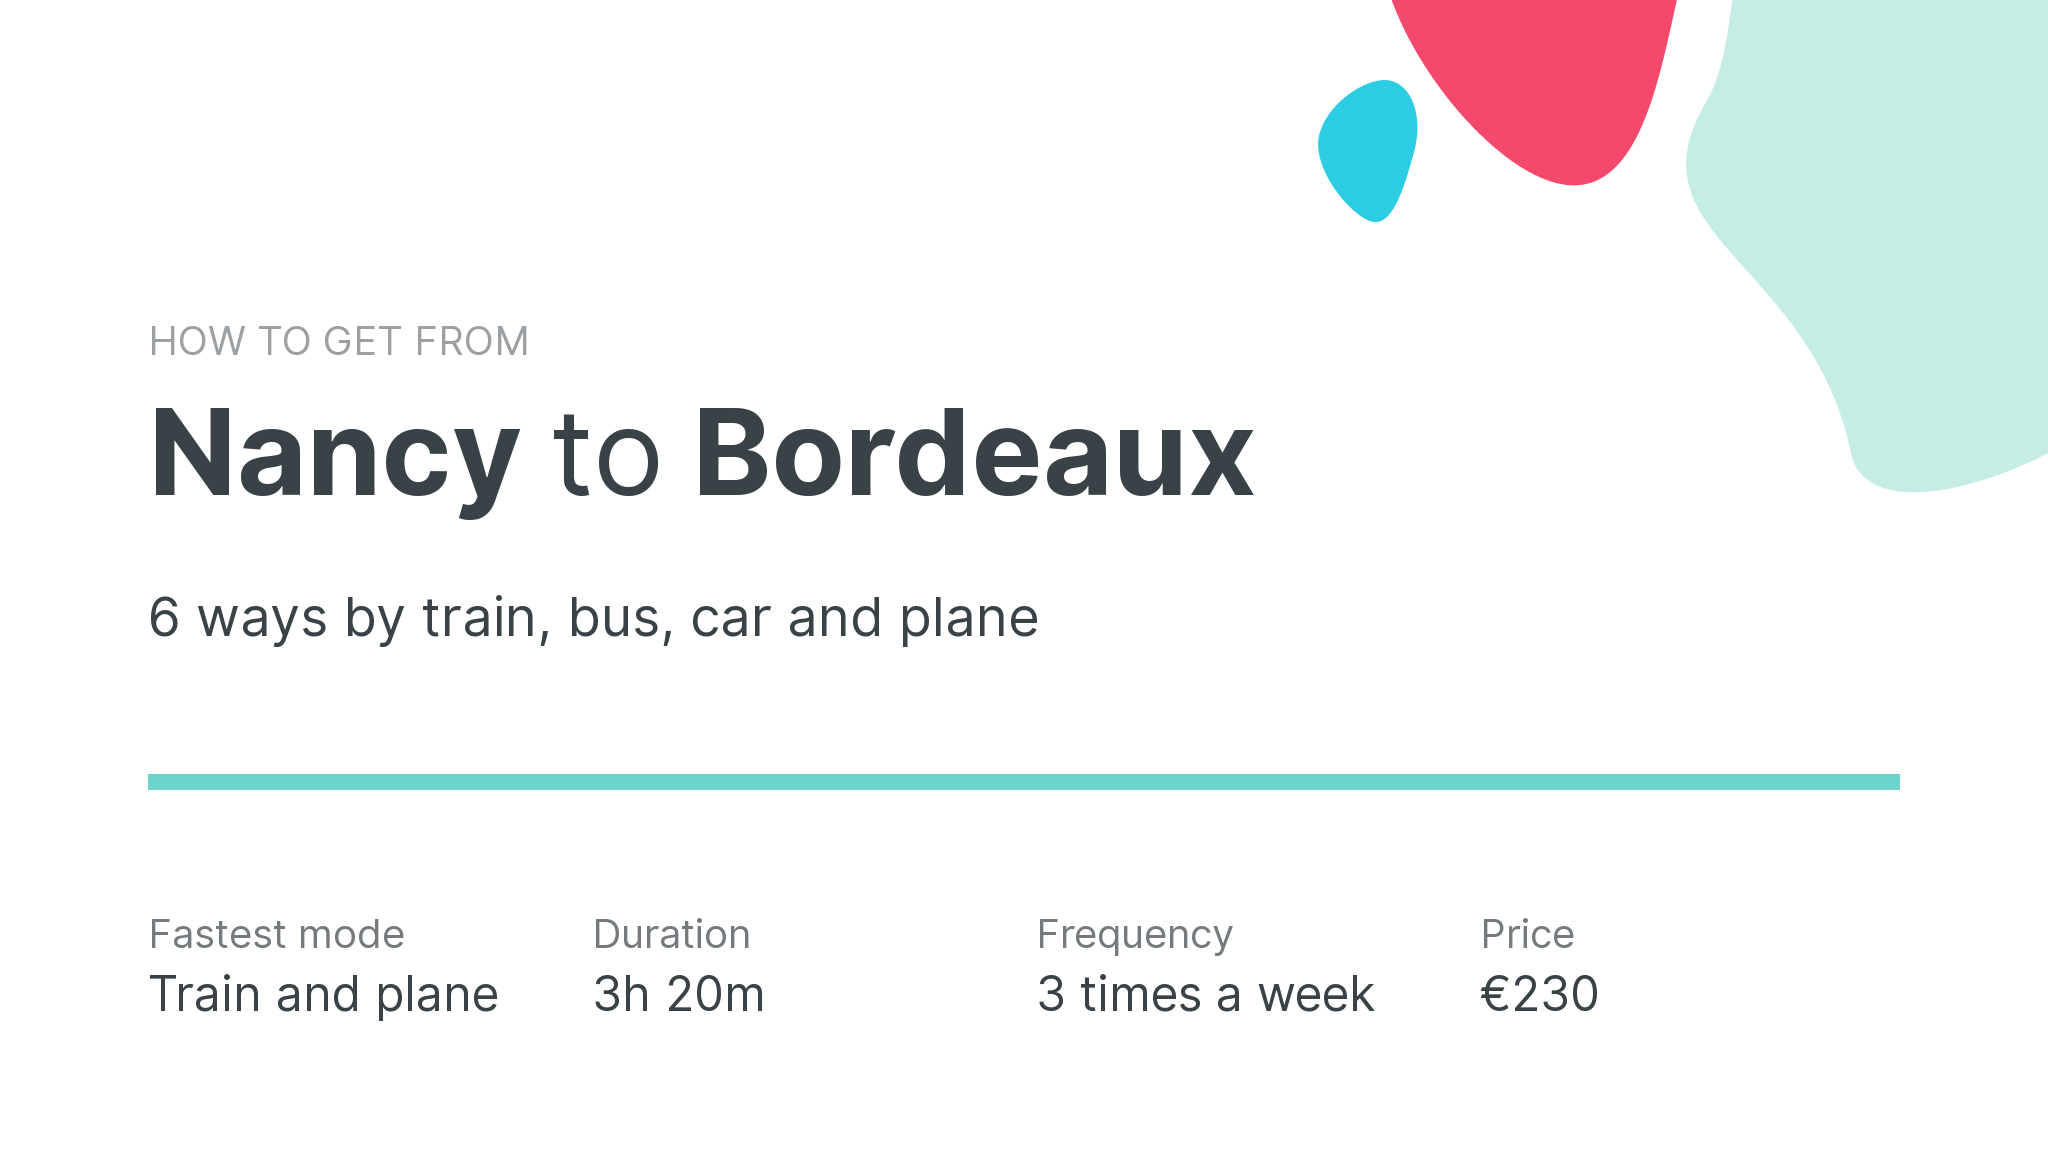 How do I get from Nancy to Bordeaux